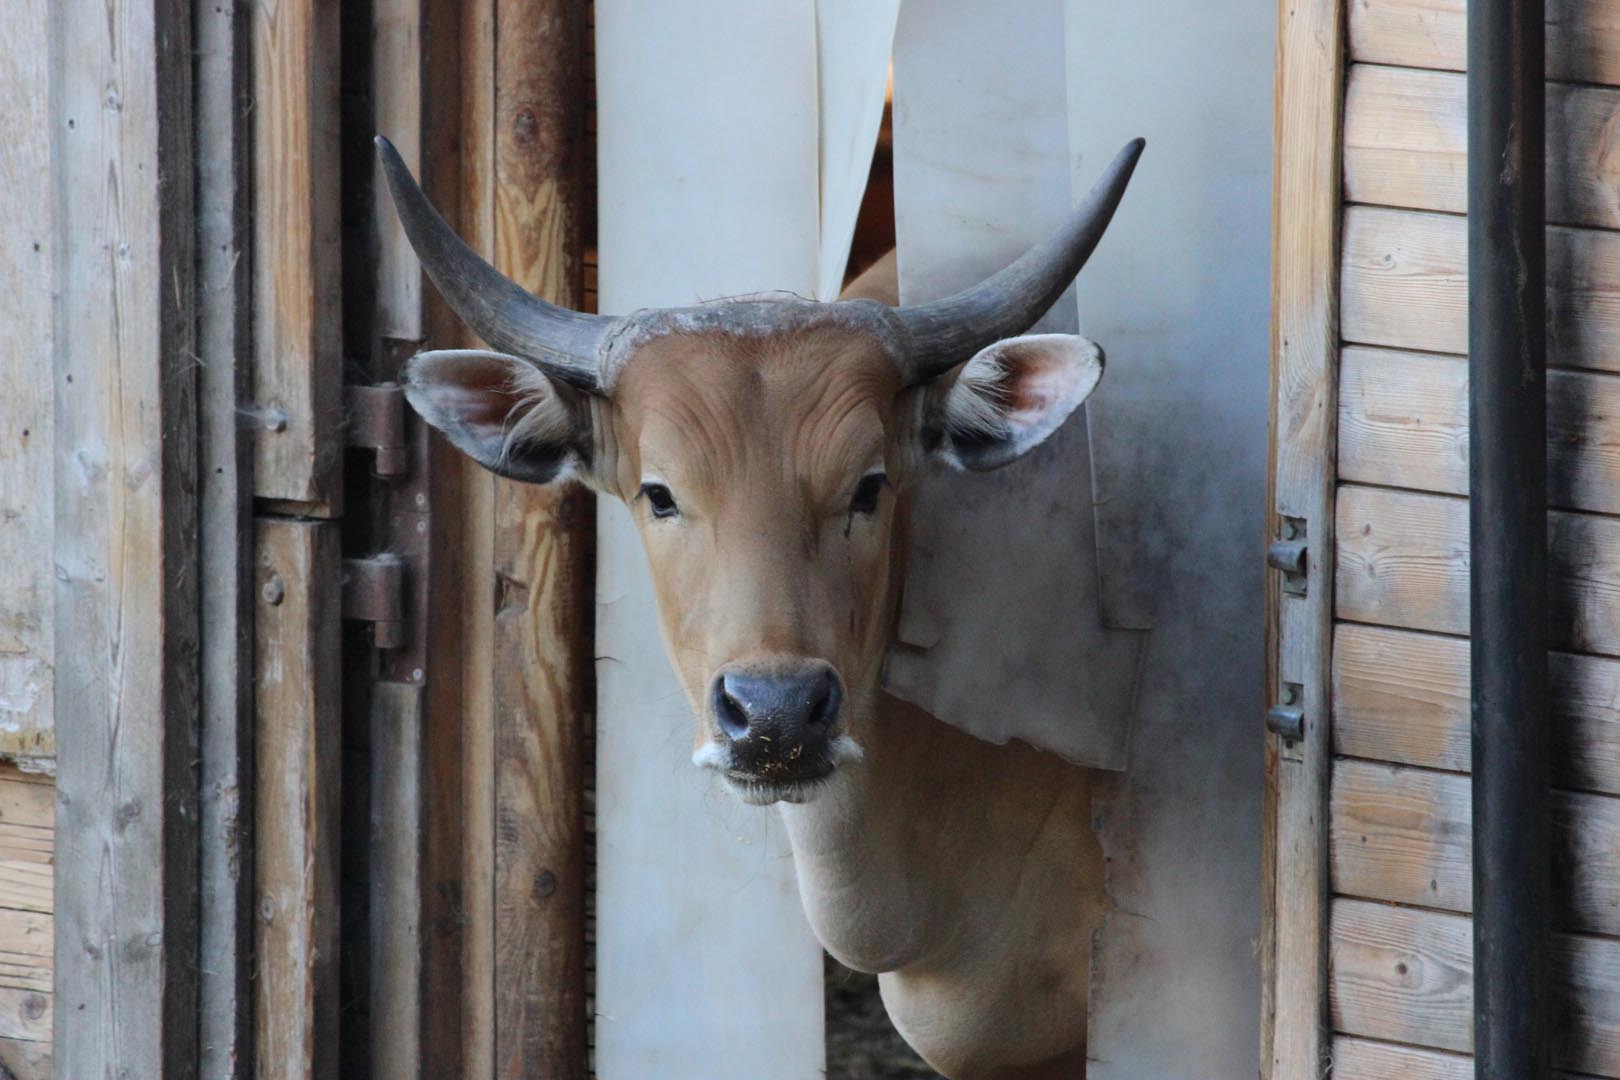 Banteng Struan looking at the camera (eye-contact) while sticking head out of door IMAGE: Hollie Watson (2021)